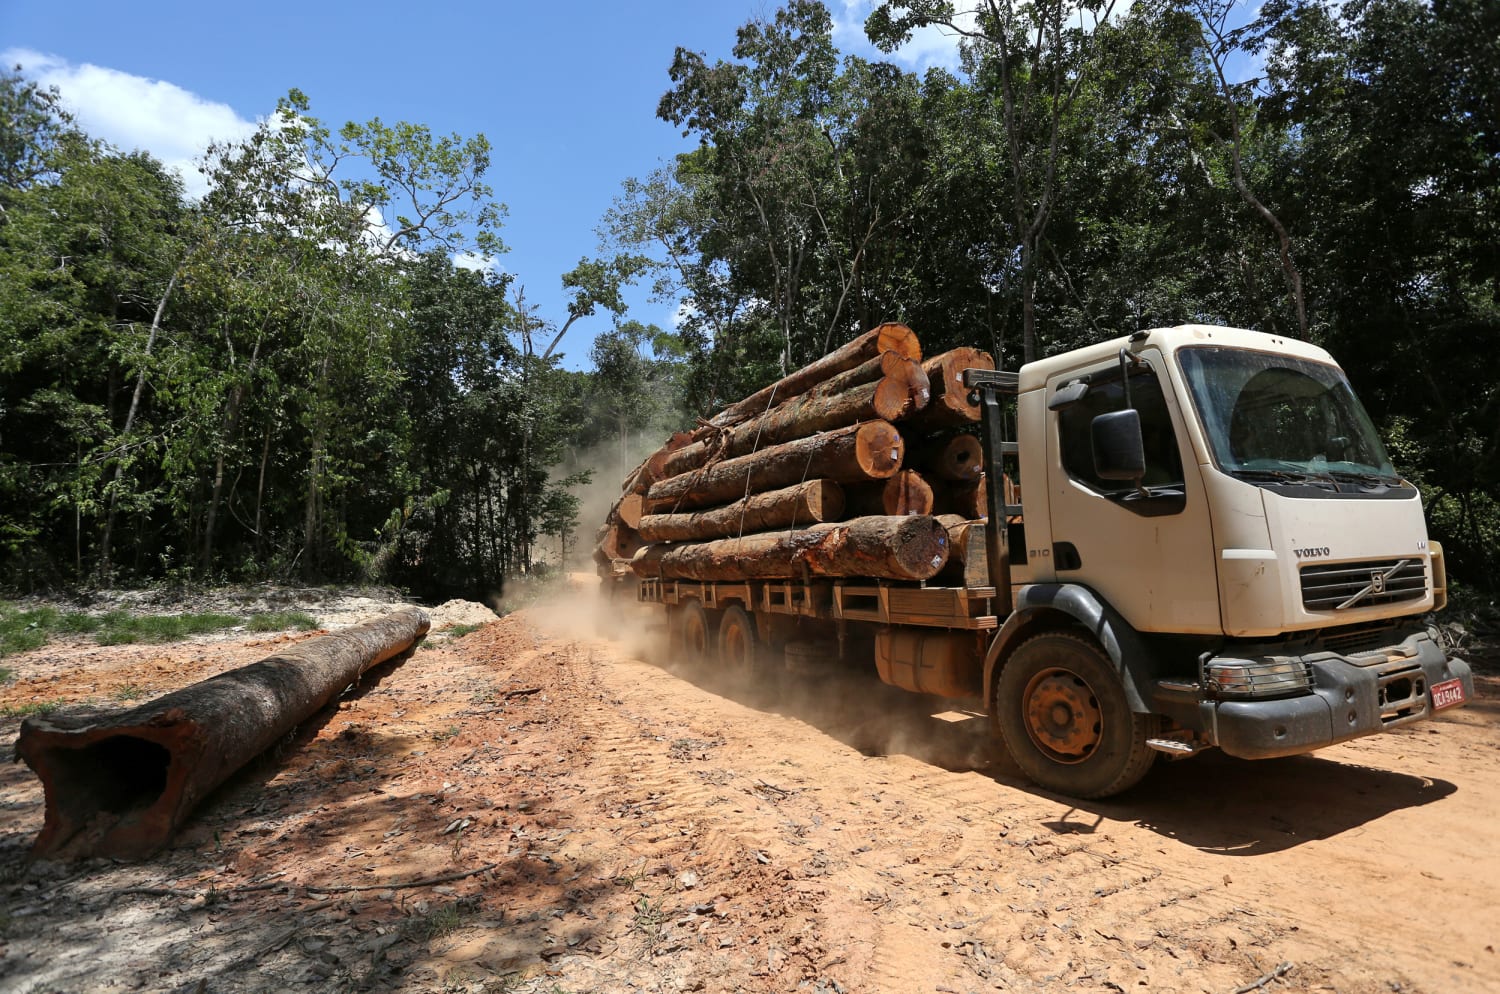 Brazil's plans to pave an  road could open path to more deforestation  : NPR